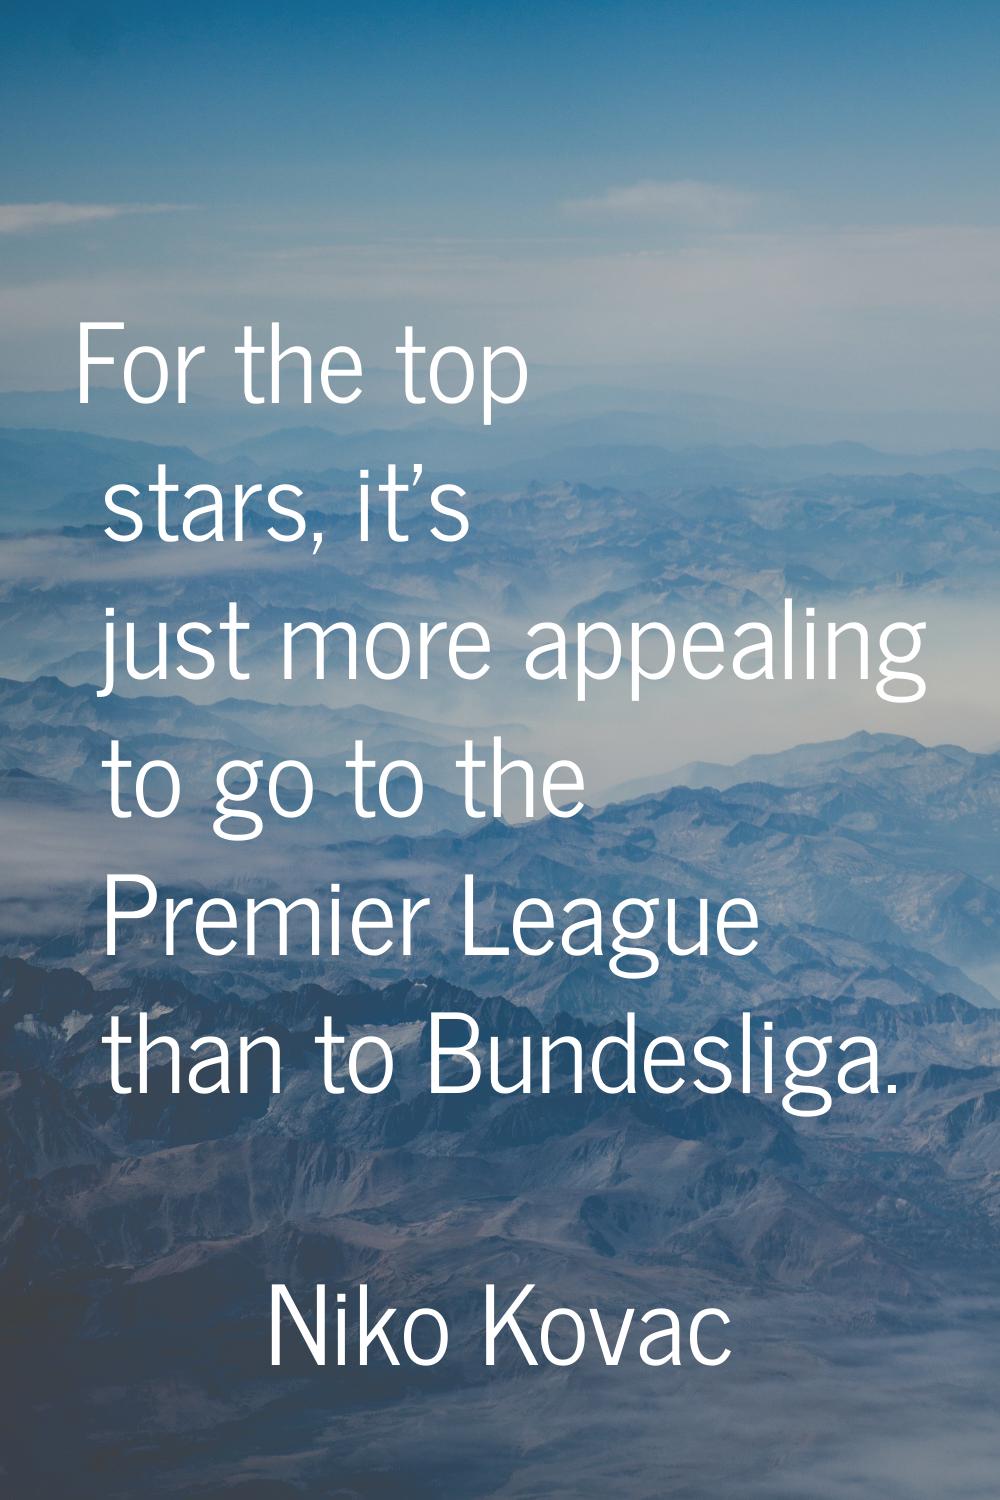 For the top stars, it's just more appealing to go to the Premier League than to Bundesliga.